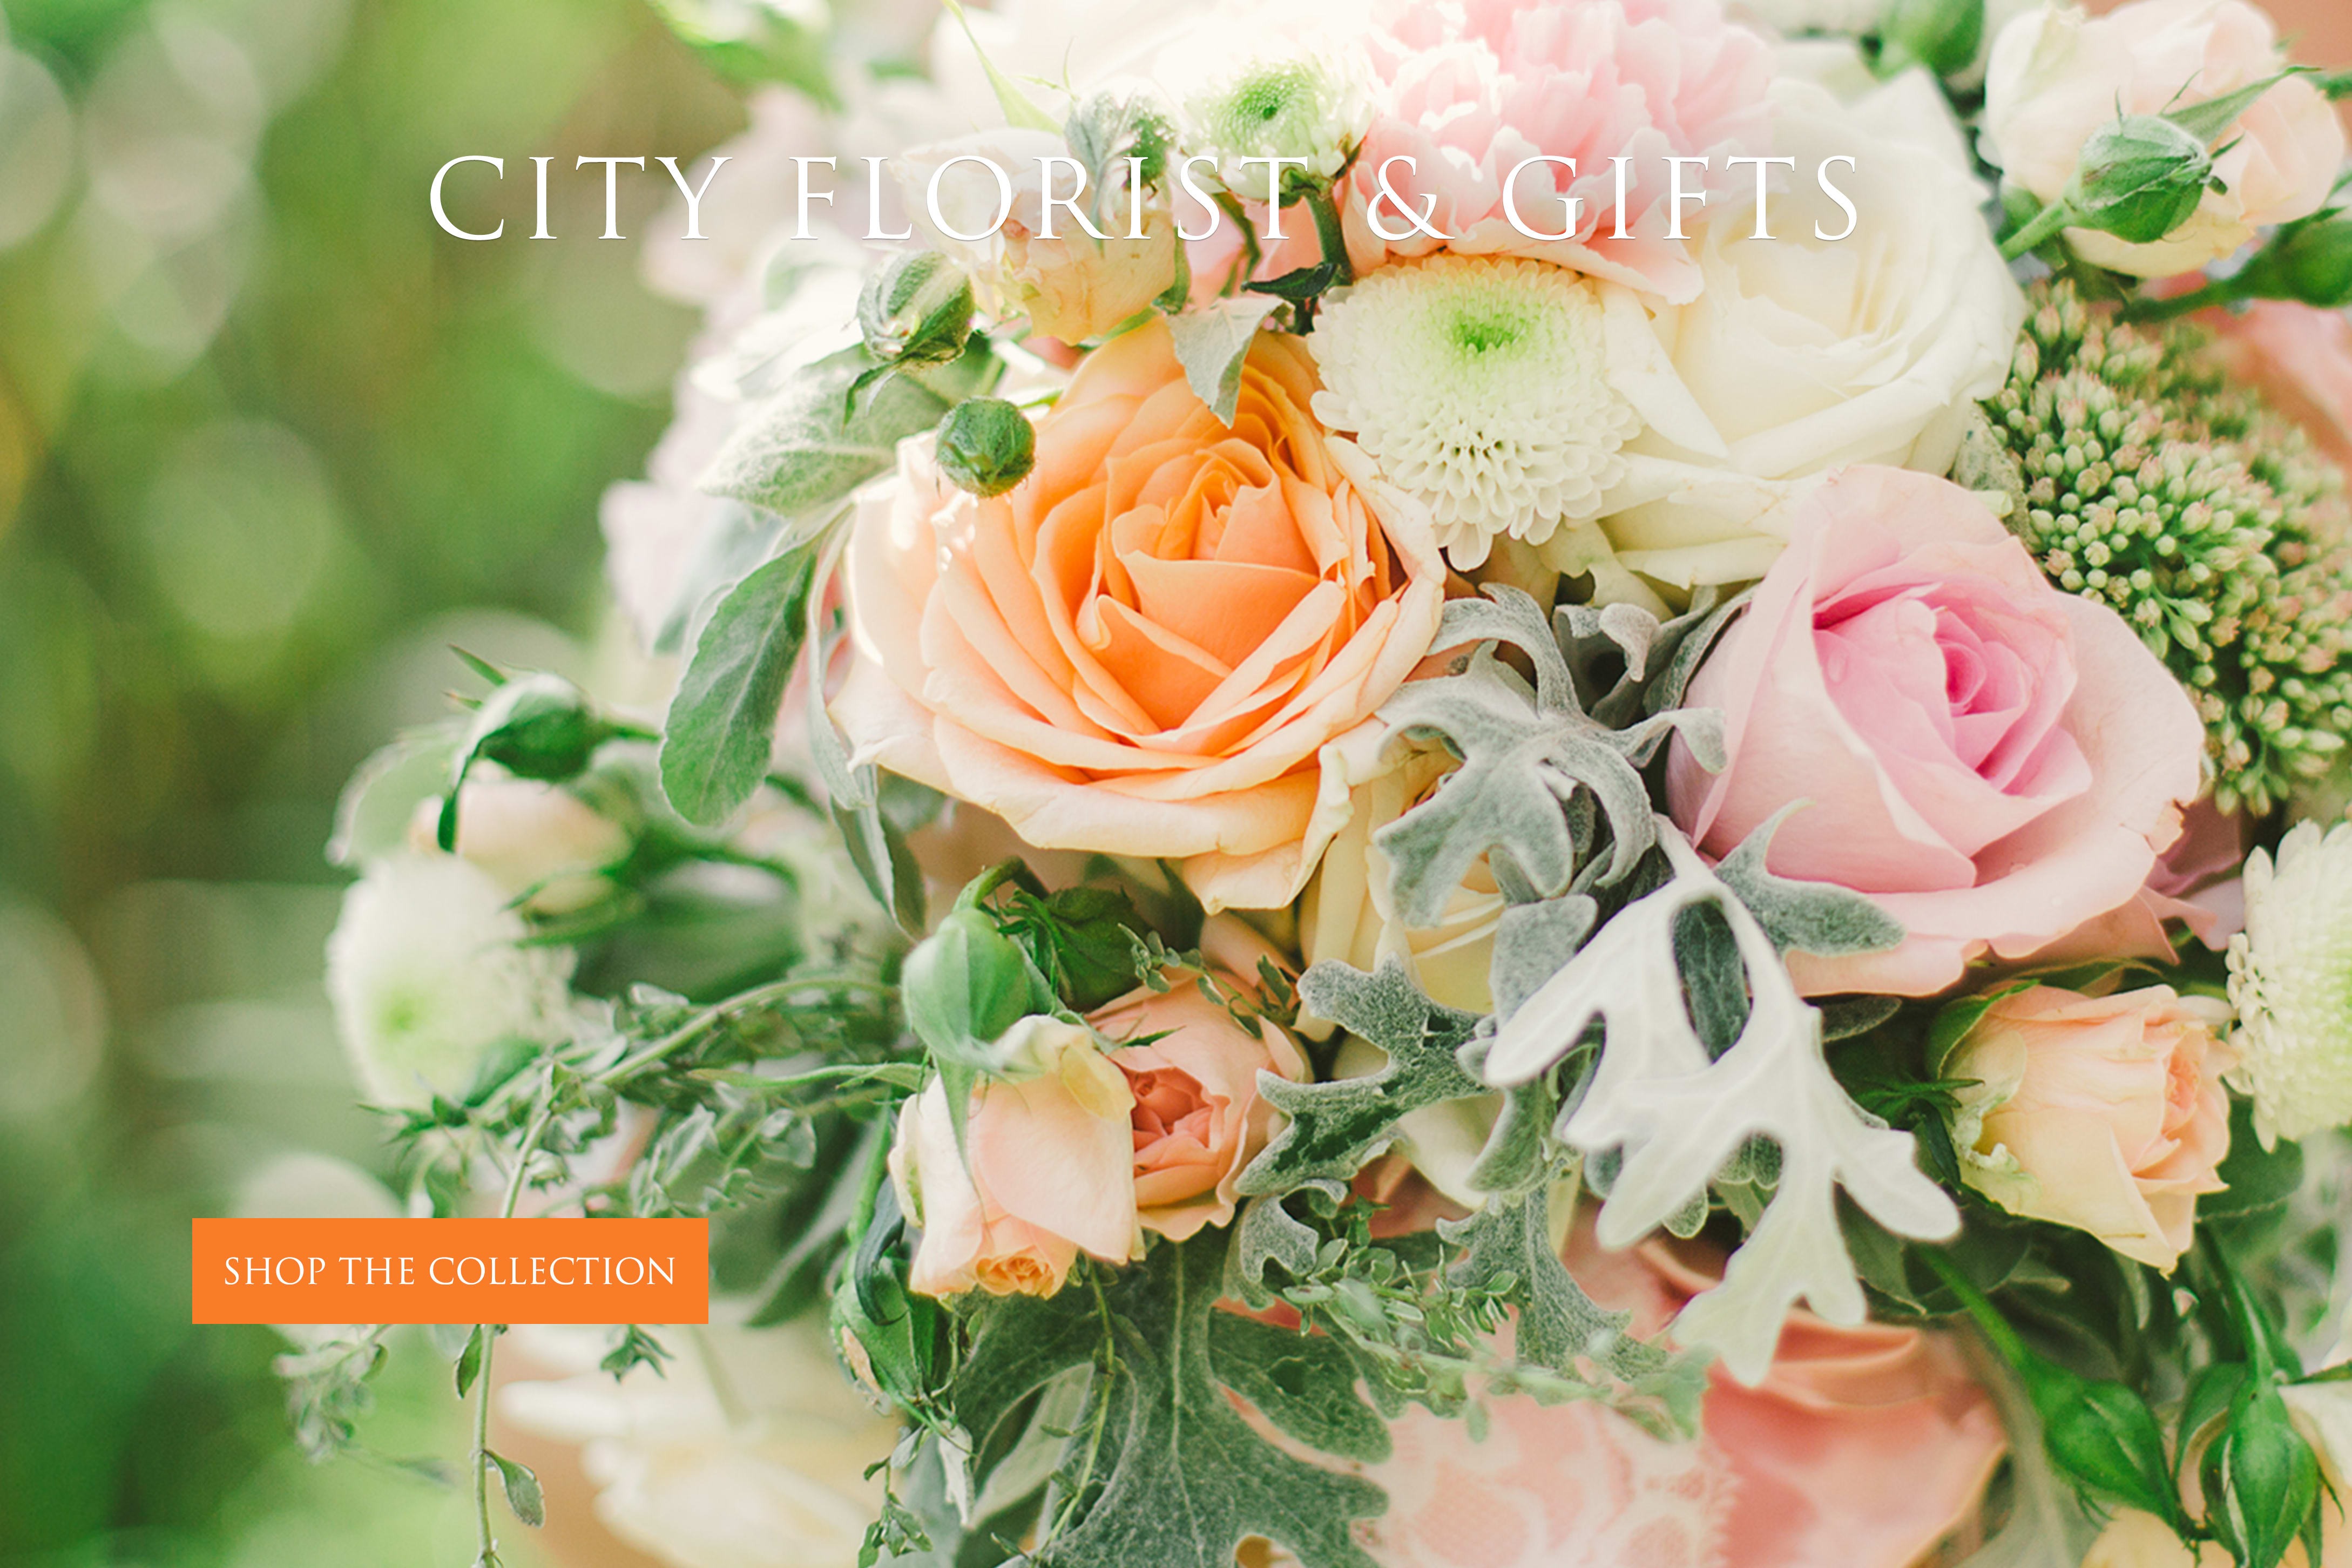 Best Florists & Flower Delivery in Chatsworth, GA - 2021